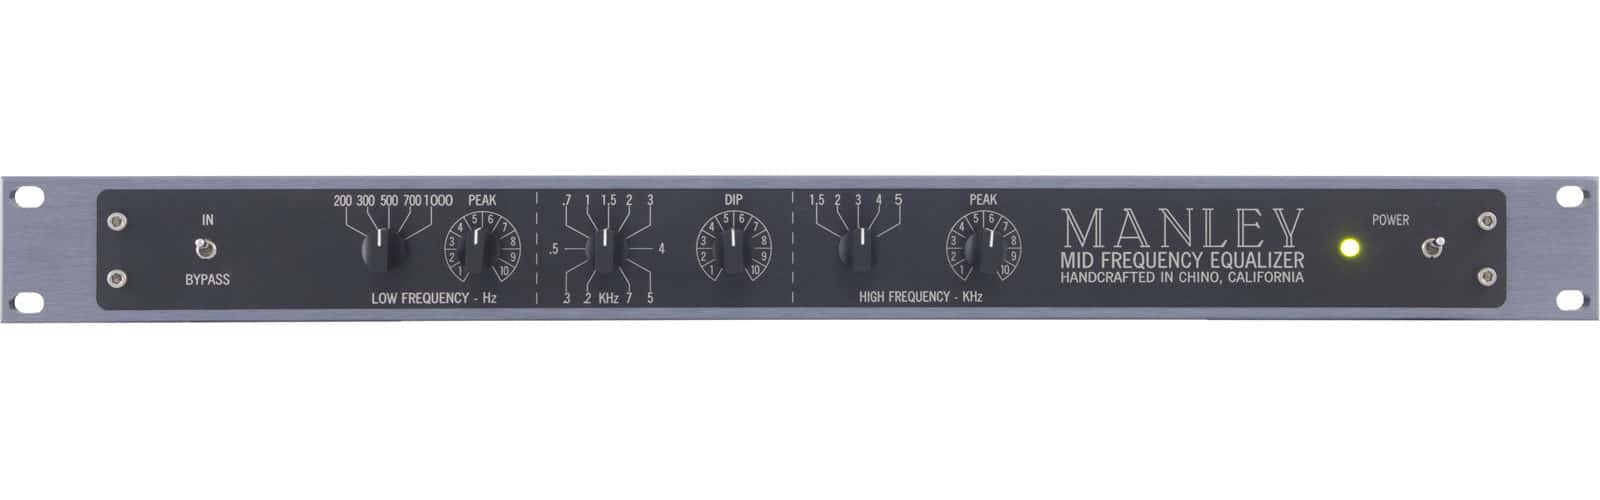 MANLEY MID FREQUENCY EQ